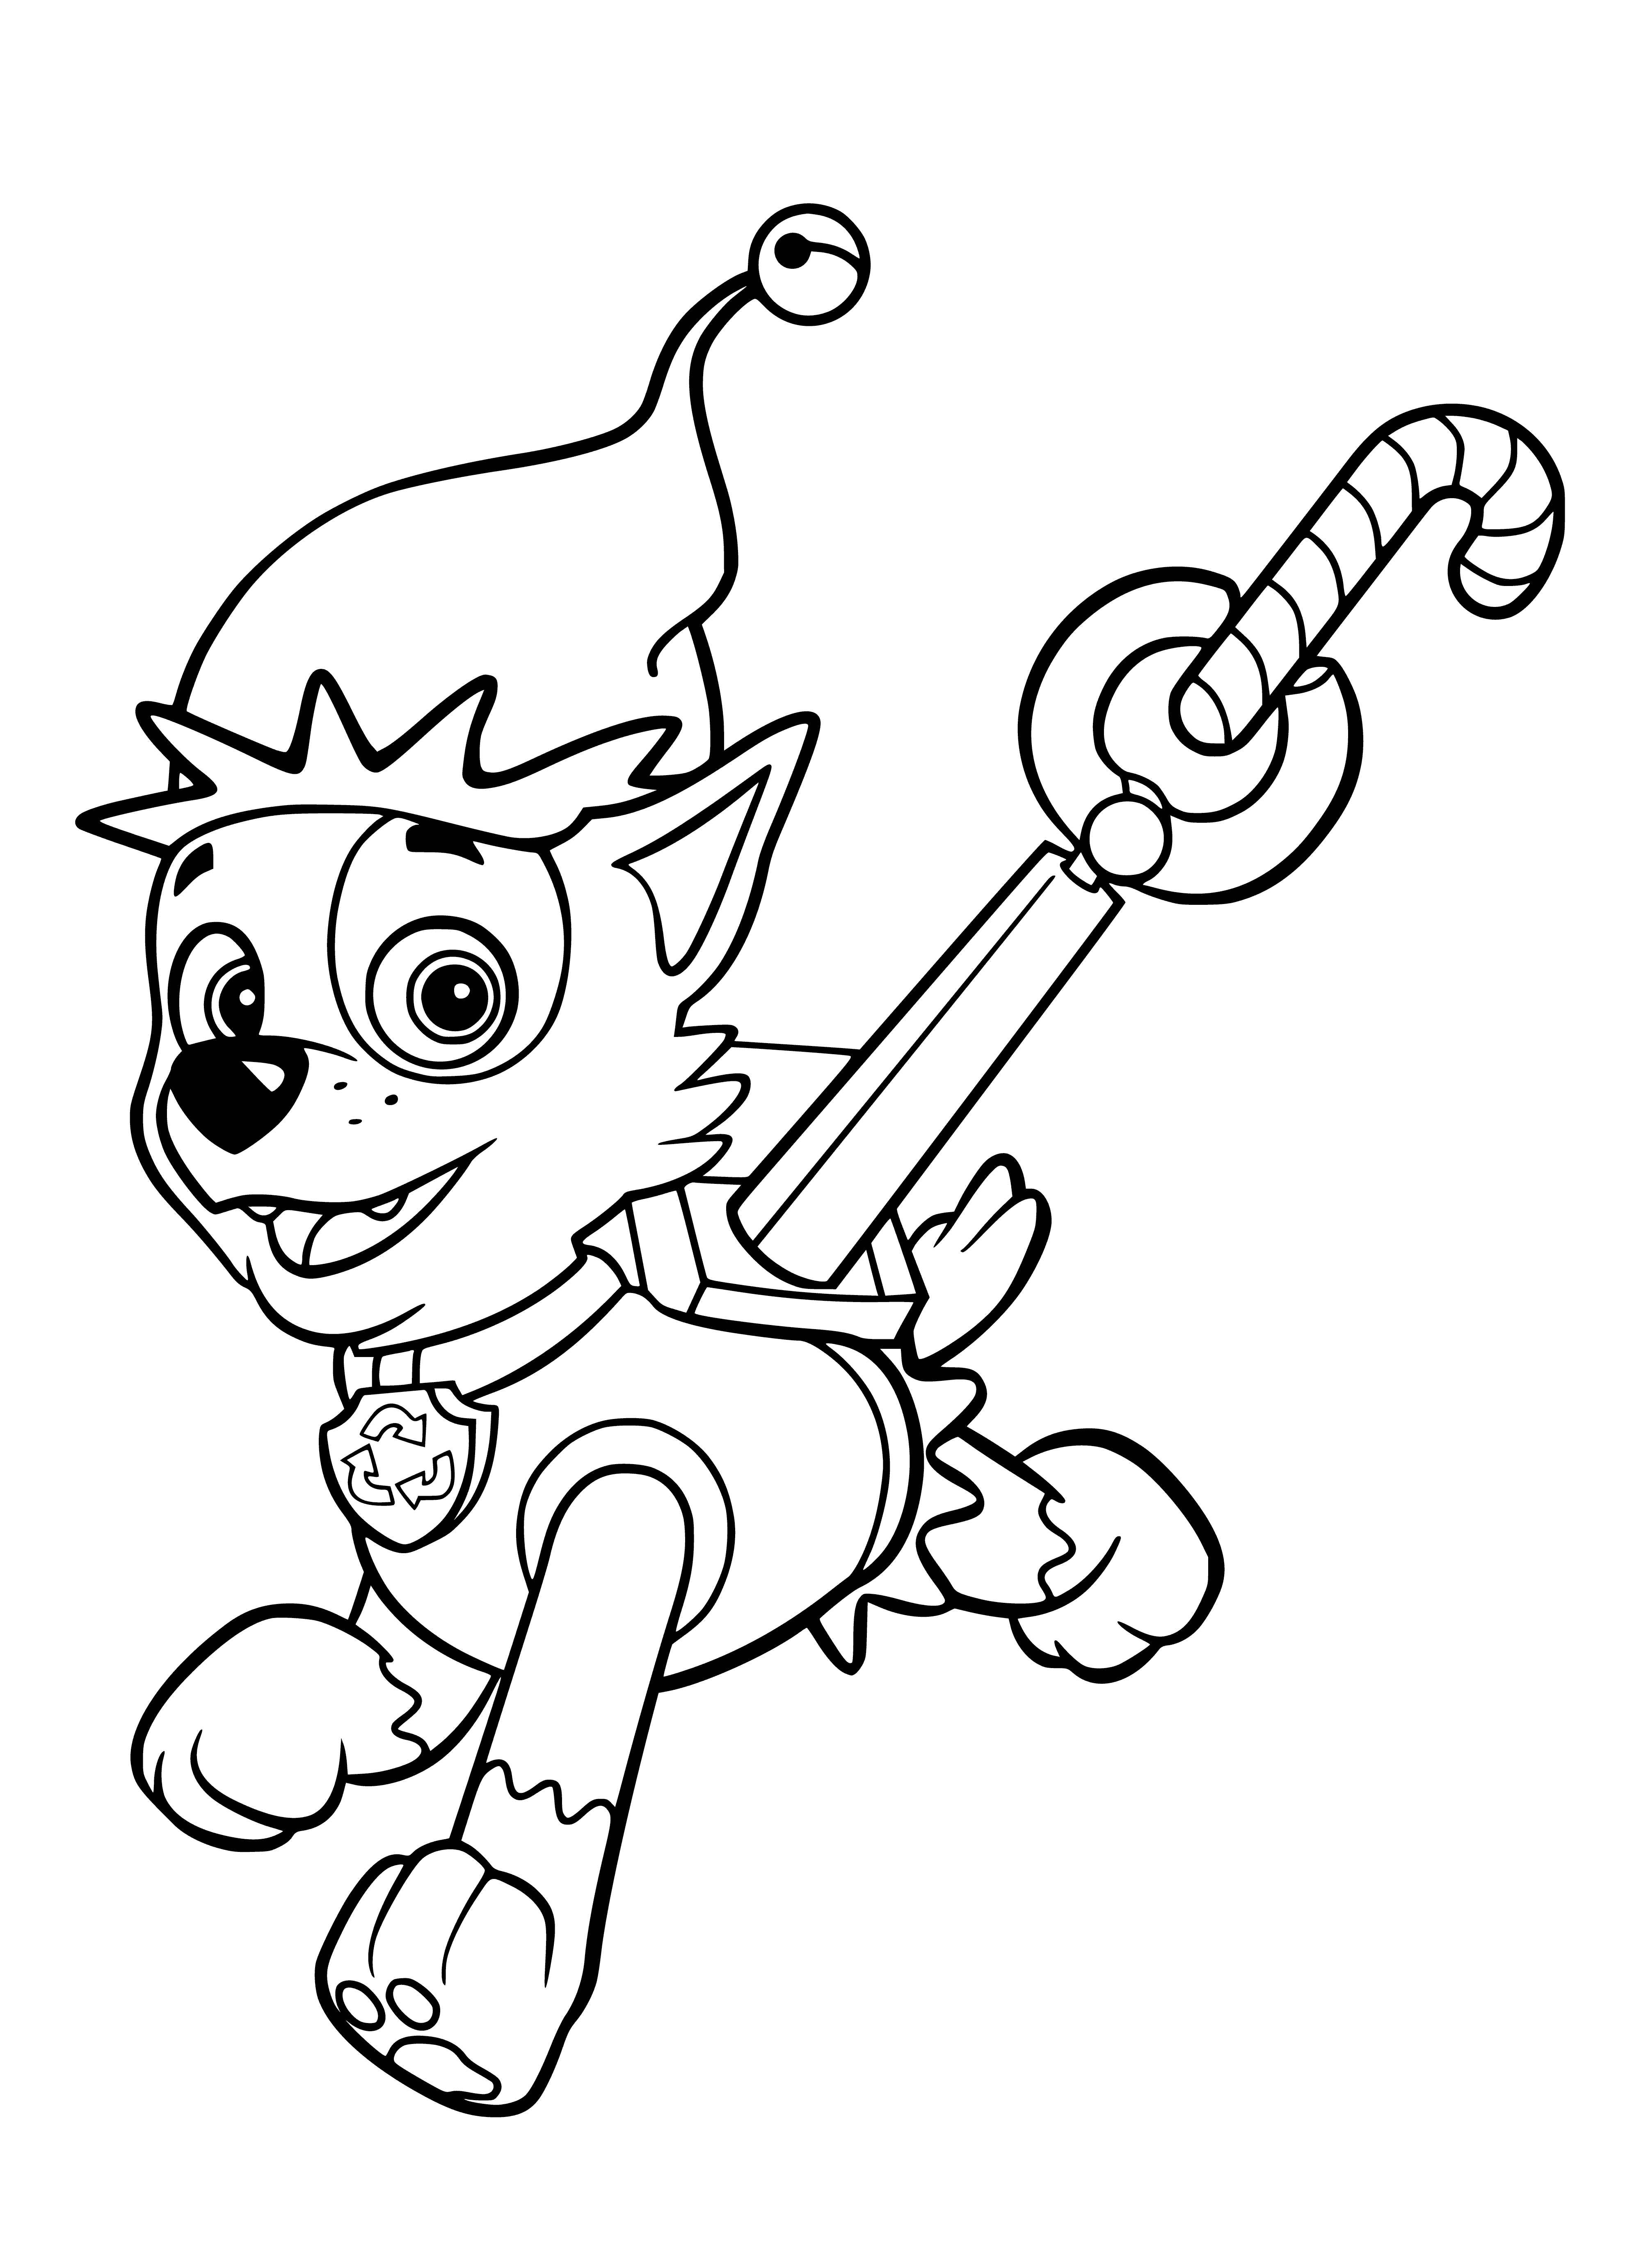 Rocky - Paw Patrol coloring page